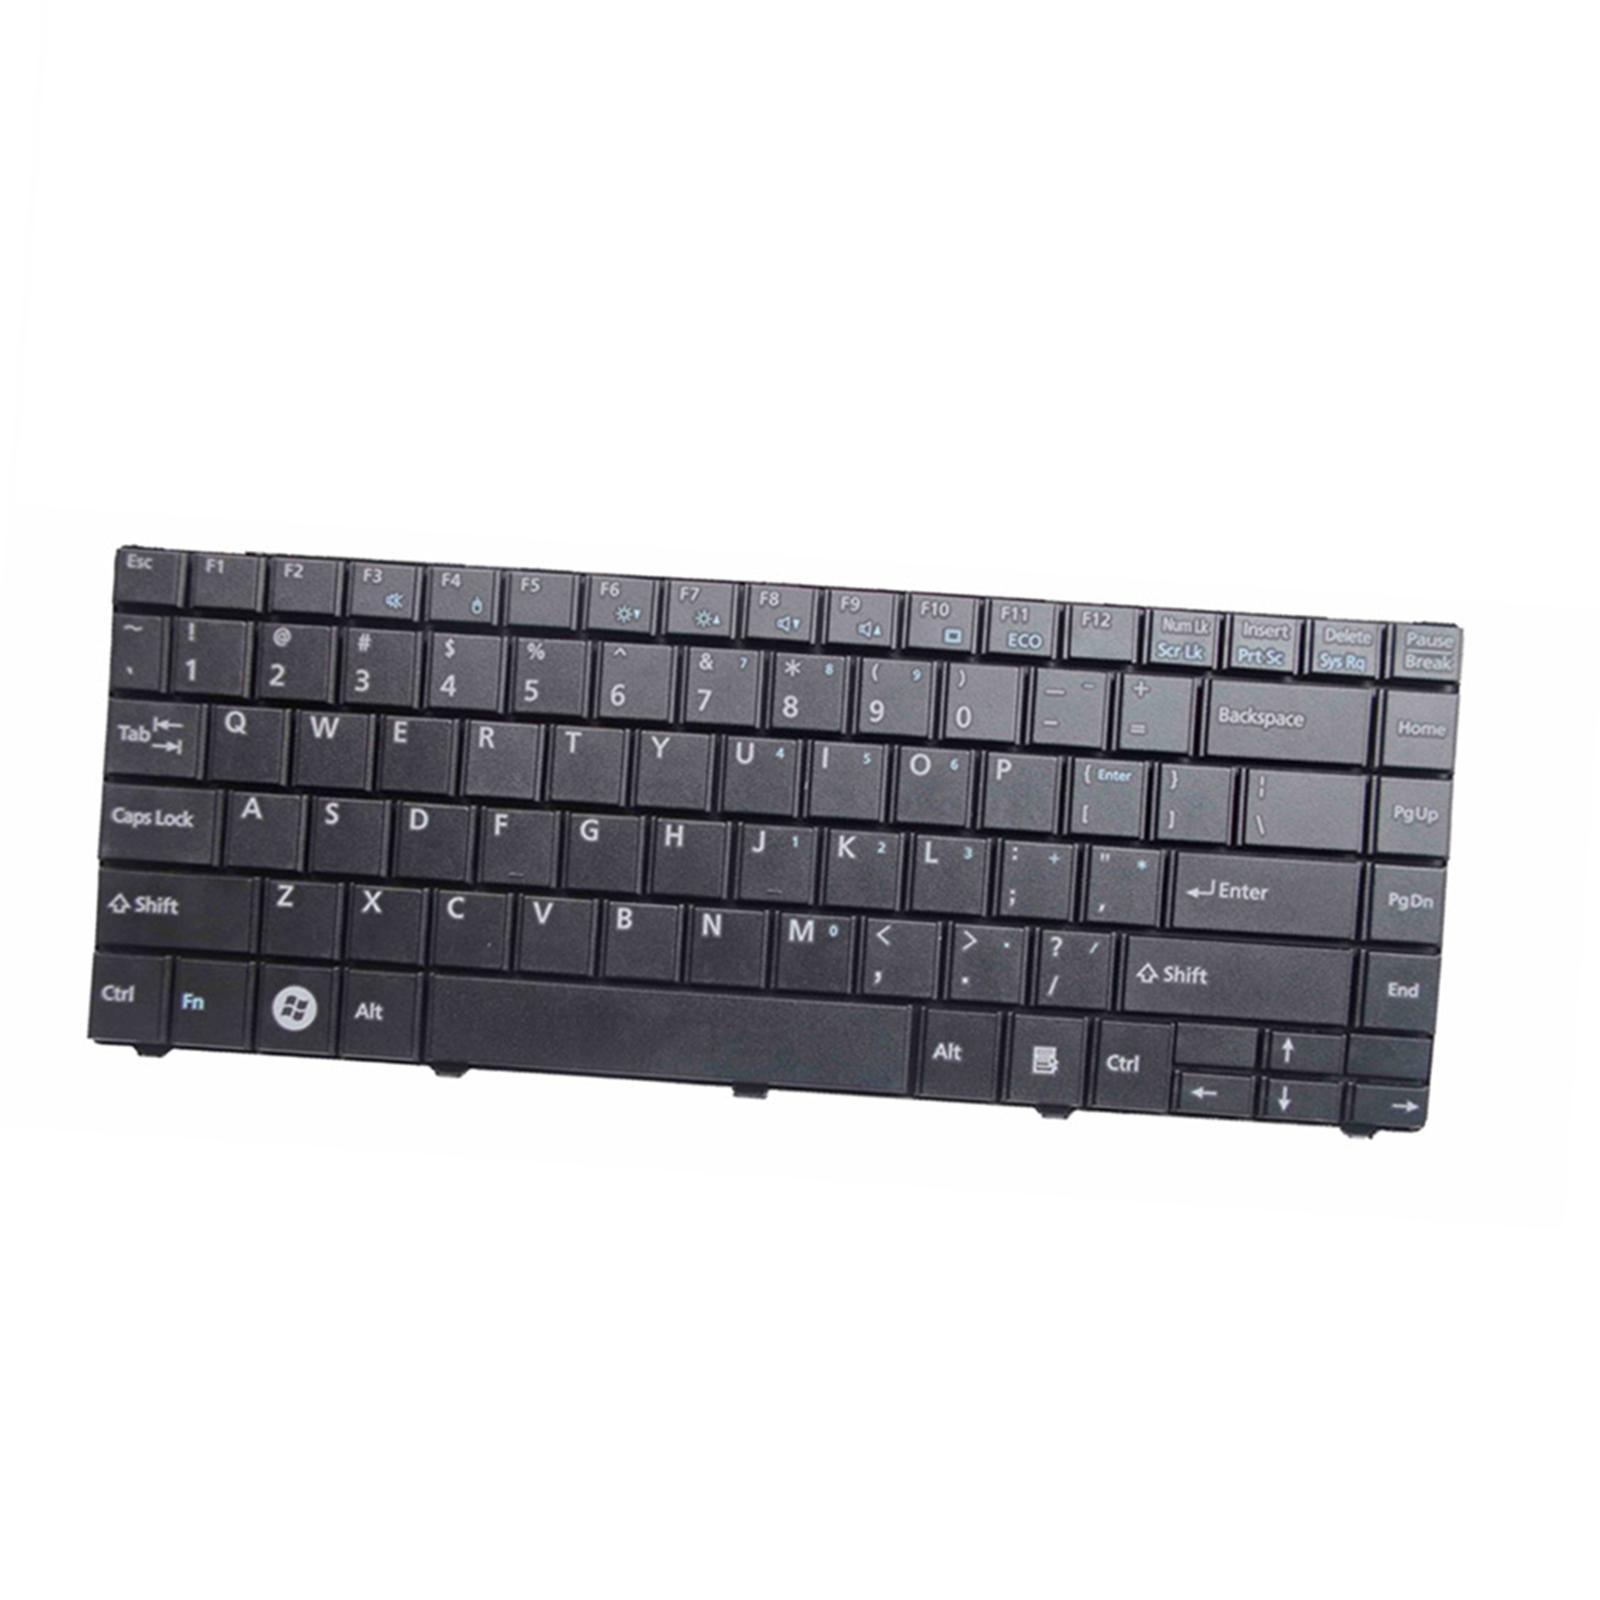 Keyboard Compact Portable for     LH531 BH531 LH701 Replace